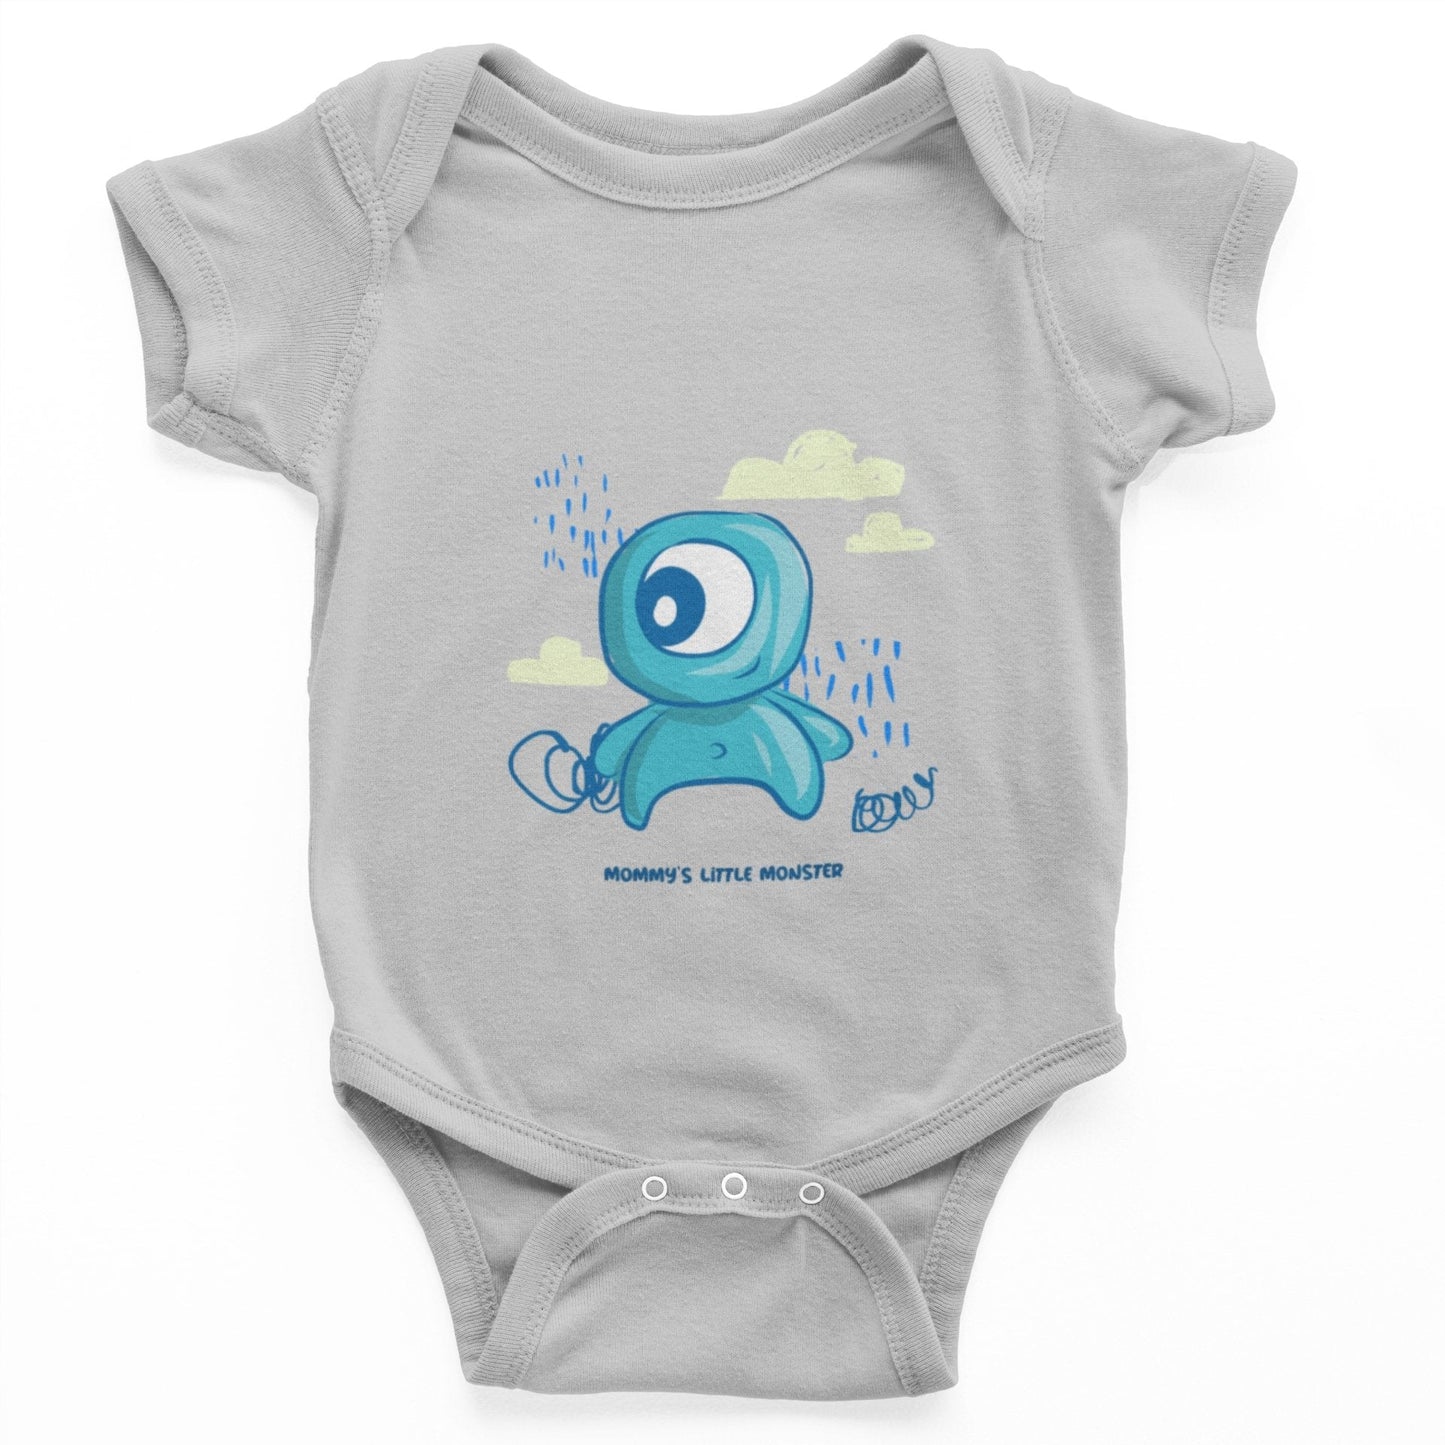 thelegalgang,Mommy's Little Monster Graphic Onesies for Babies,.